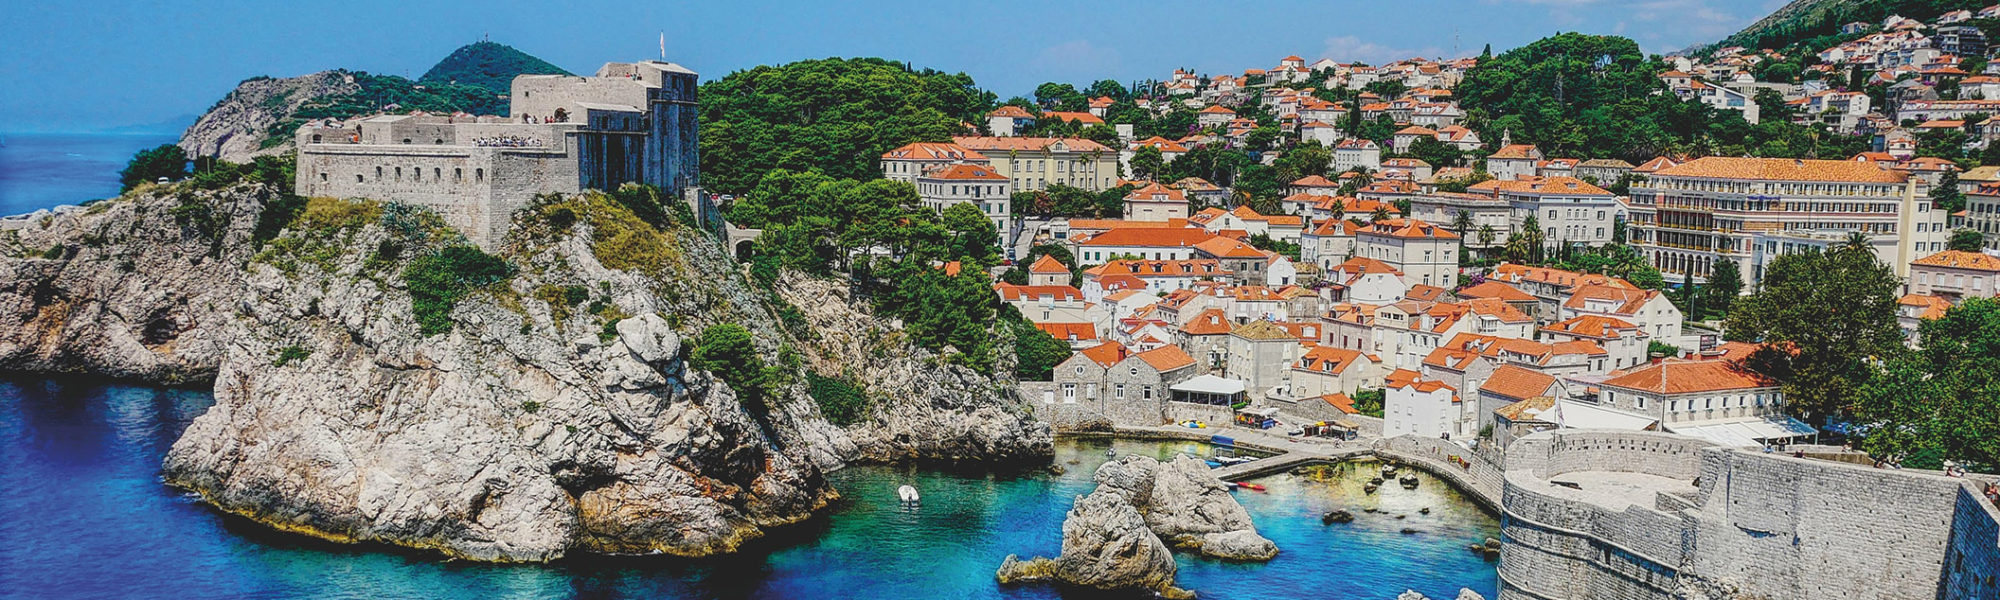 A scenic view of the stone walls of the Walls of Dubrovnik in the west harbor with the ocean and cityscape of Dubrovnik, Croatia from Jaya Travel & Tours.